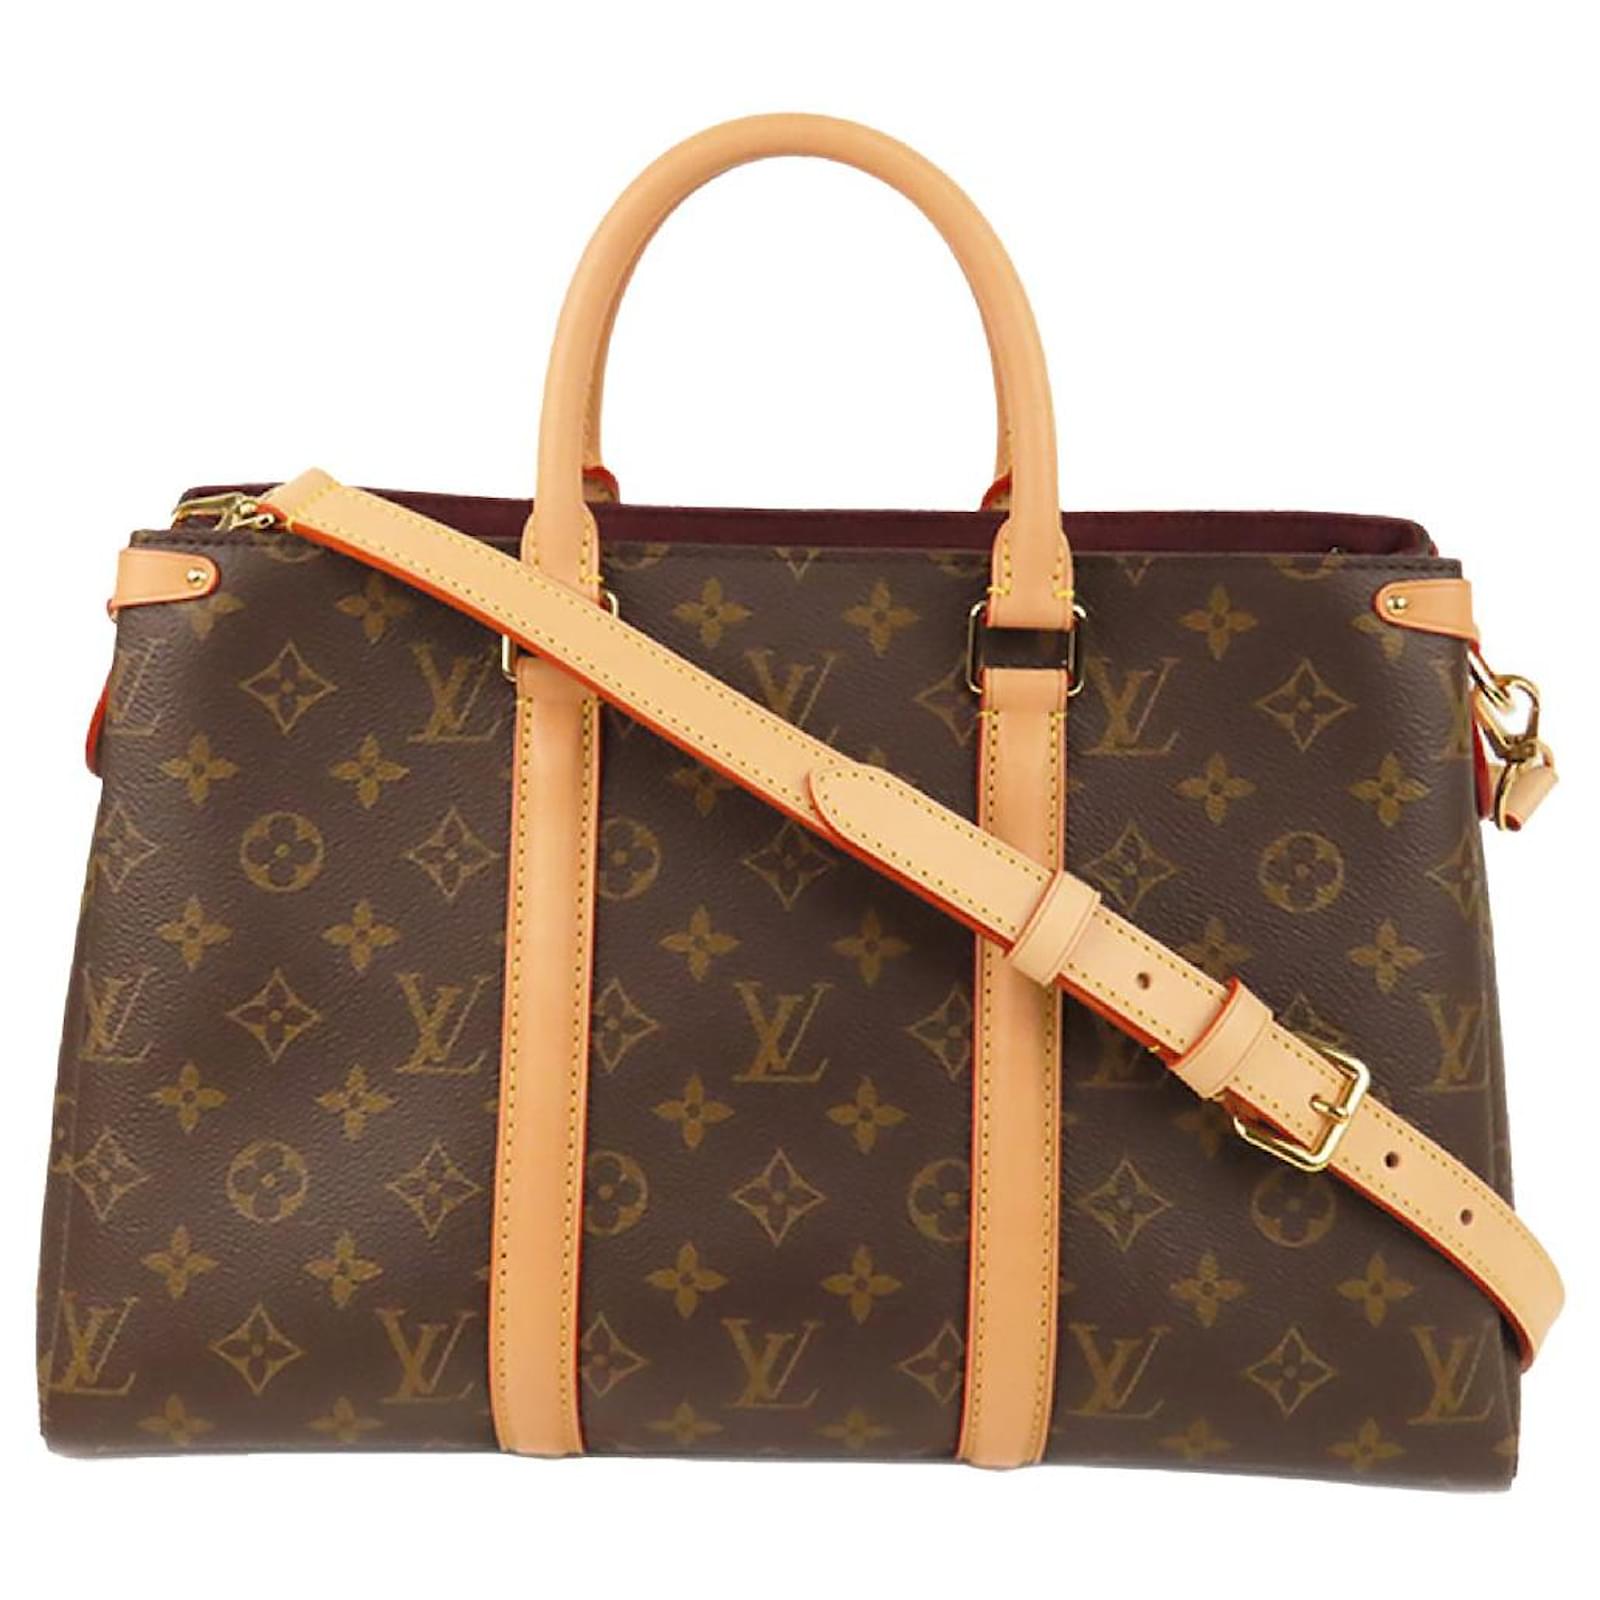 Soufflot BB Monogram Canvas/Colored leather in Brown - Handbags